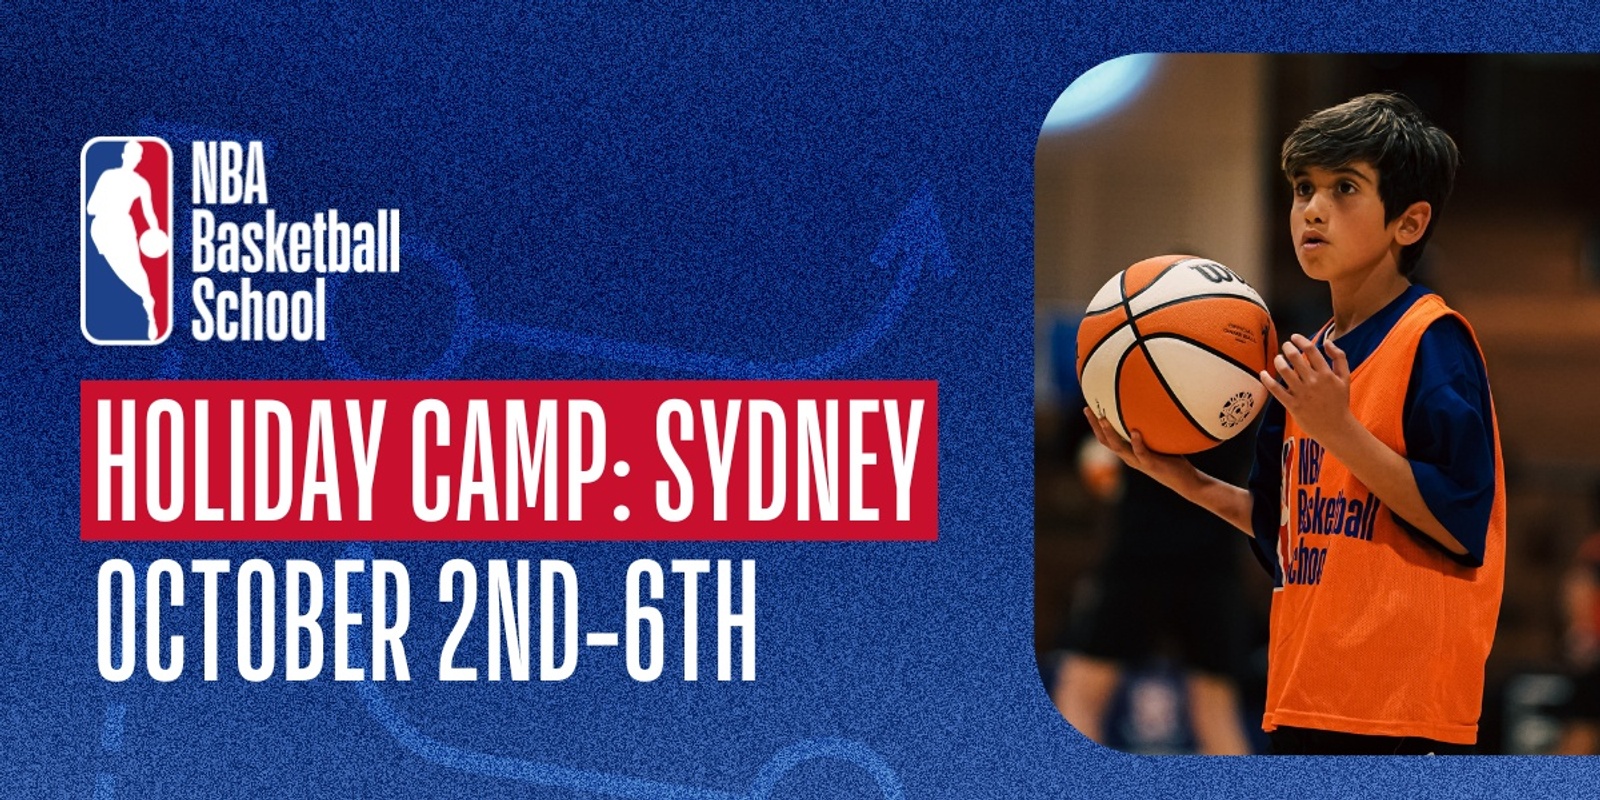 Banner image for October 2nd - 6th 2023 Holiday Camp in Sydney at NBA Basketball School Australia